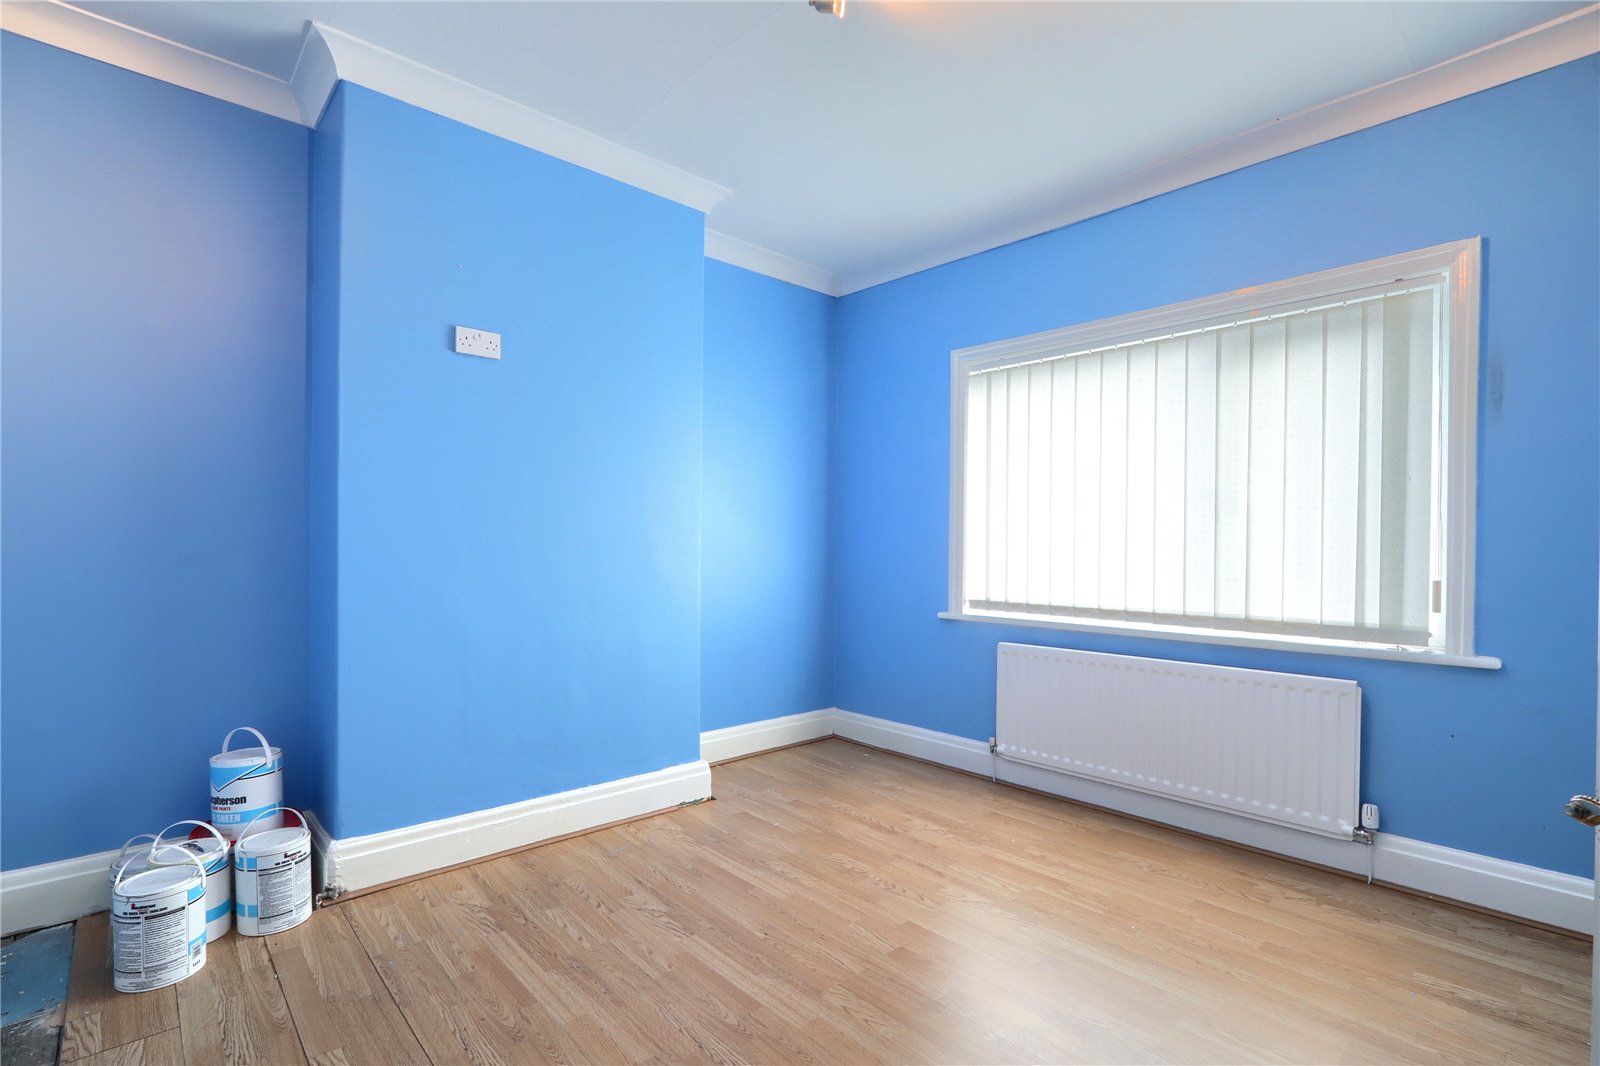 3 bed house for sale in Richardson Road, Stockton-on-Tees  - Property Image 6